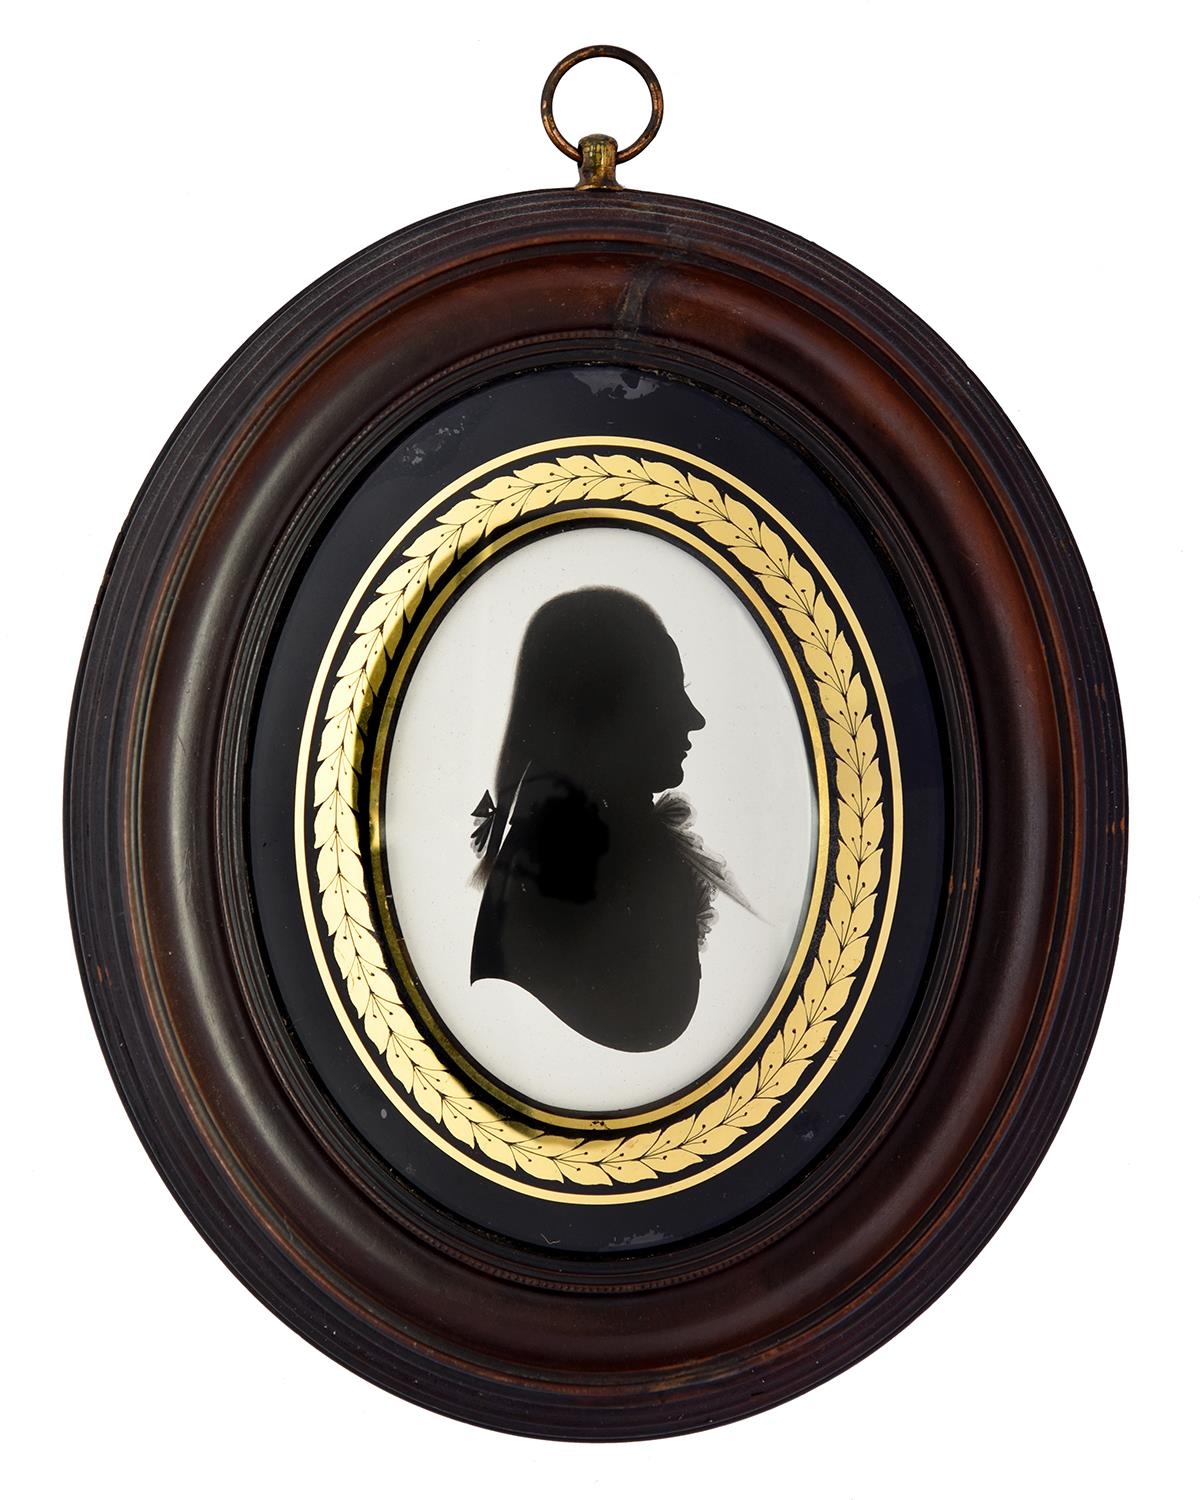 Houghton and Bruce (fl. c1792-1796) - Silhouette of a Gentleman, wearing pigtail wig and a frilled